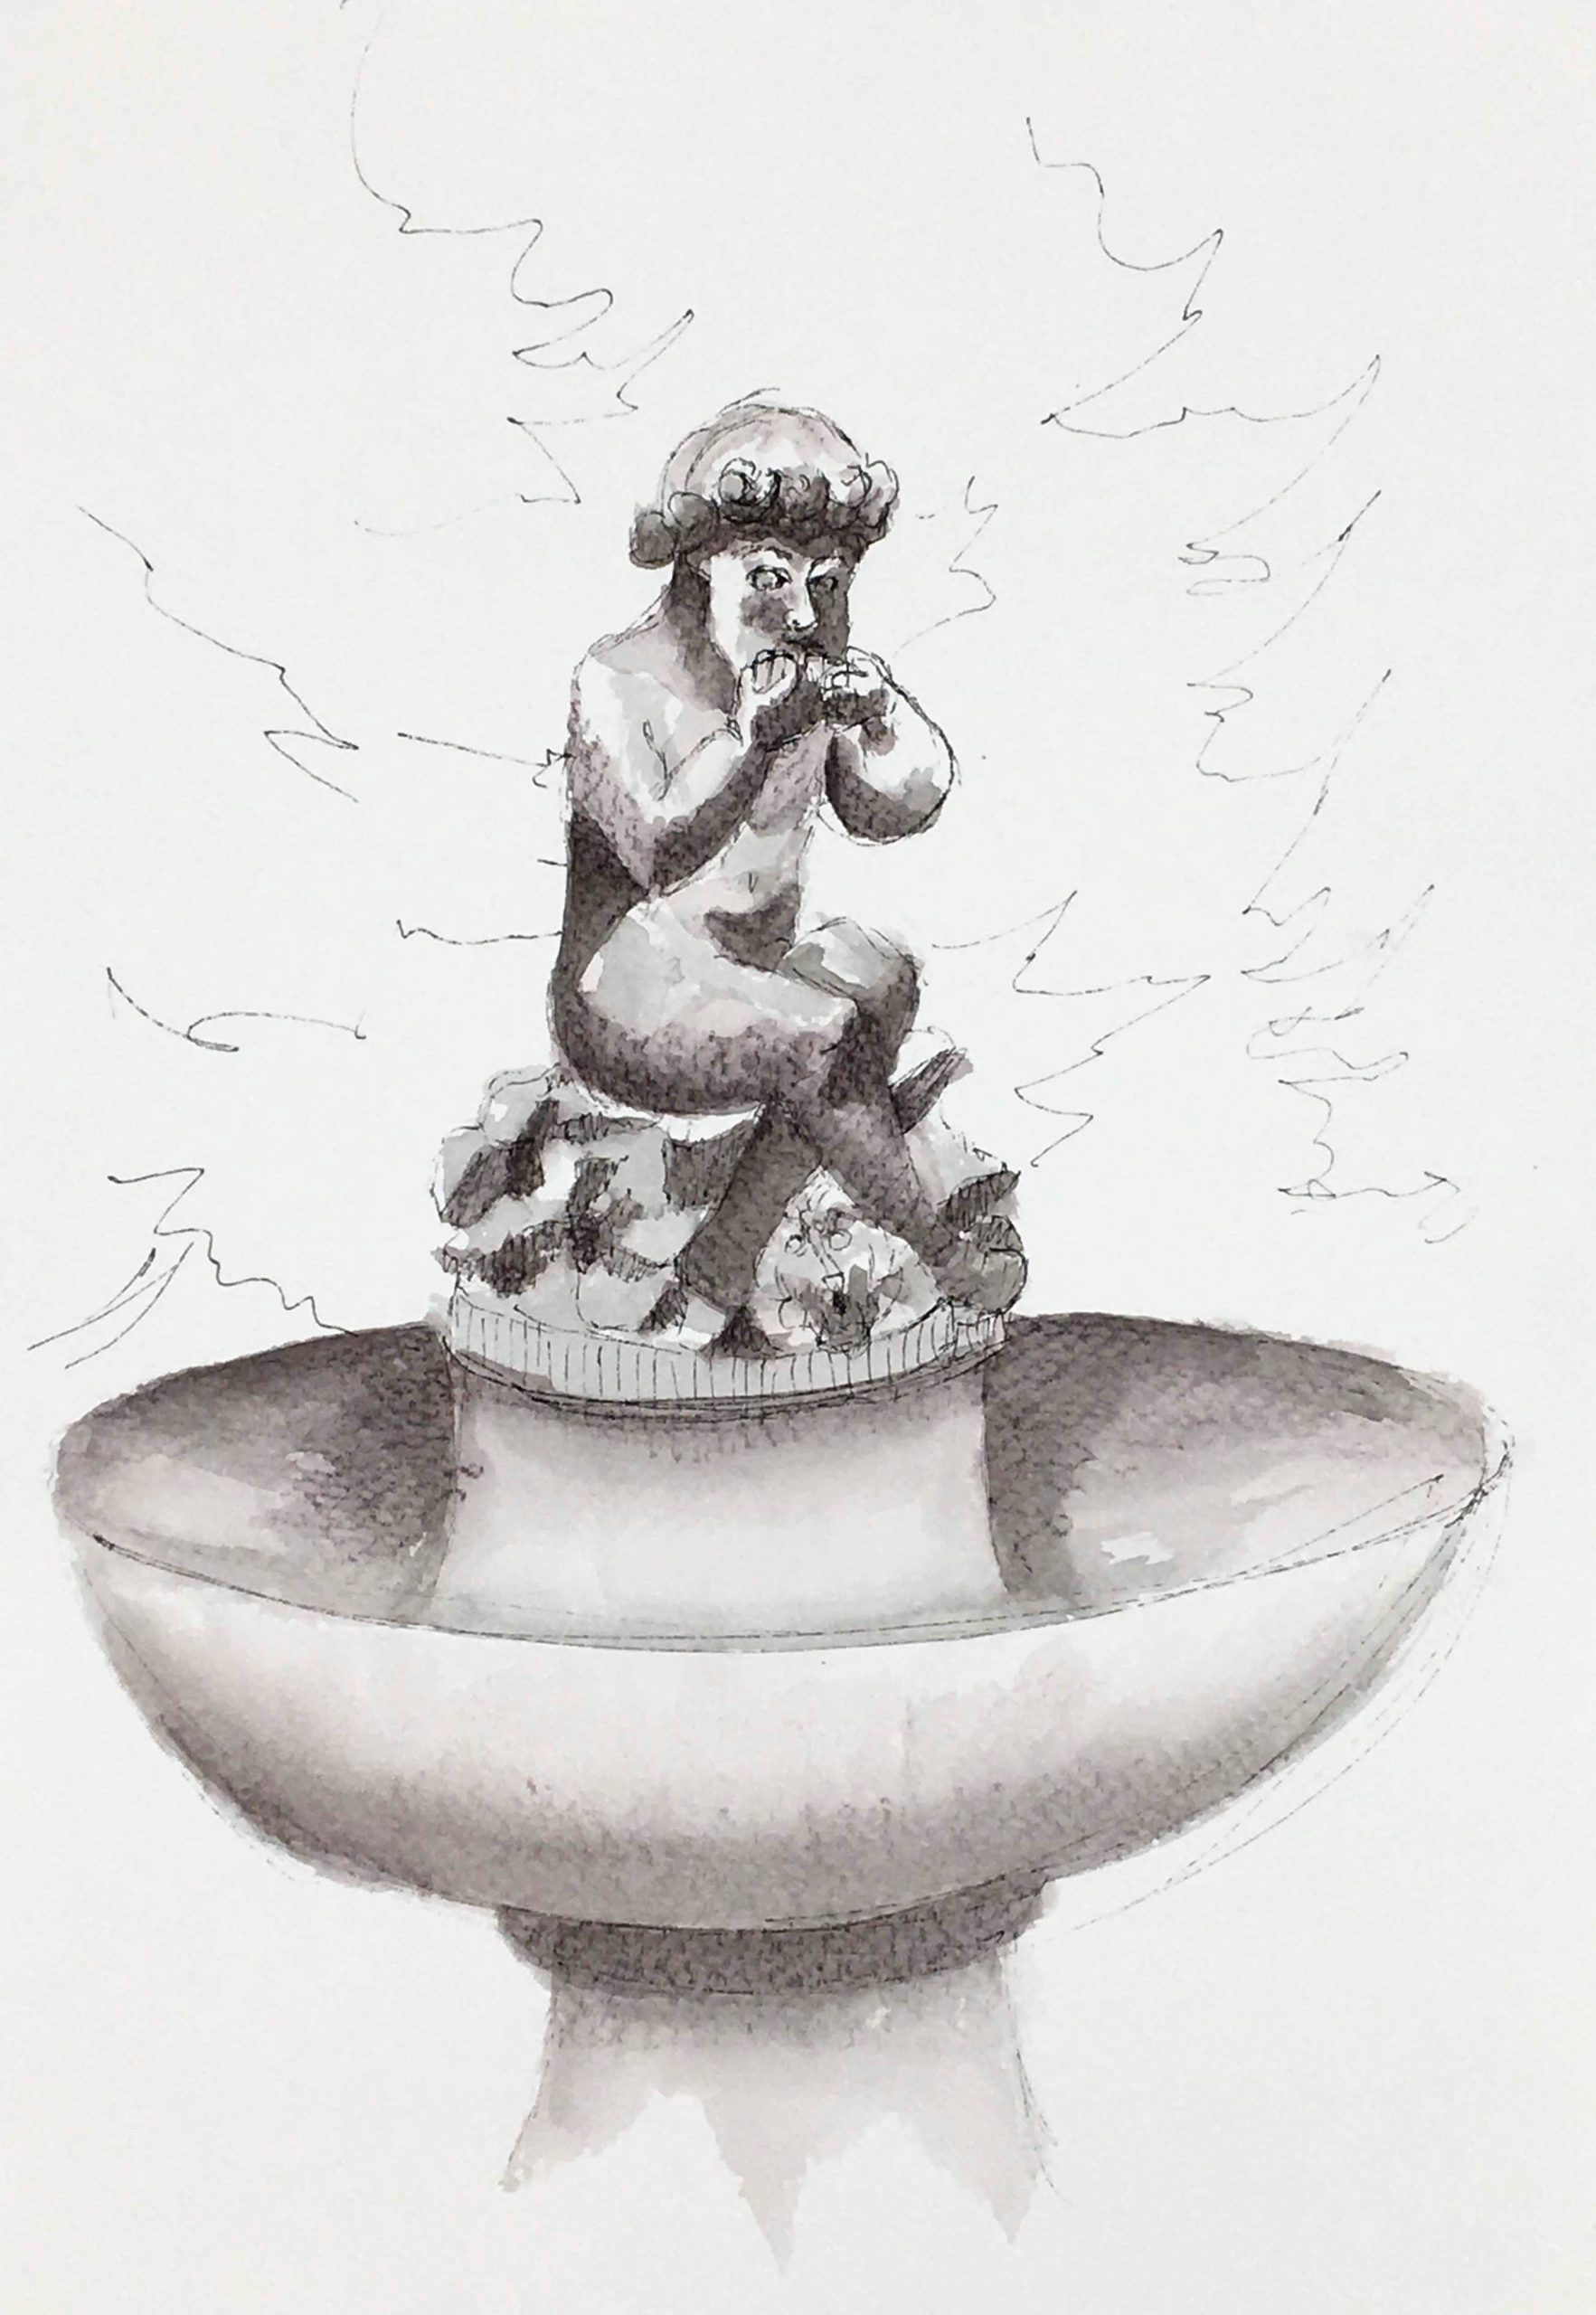 Sketch of a Statue from the Garden of Villa Pisani of Stra